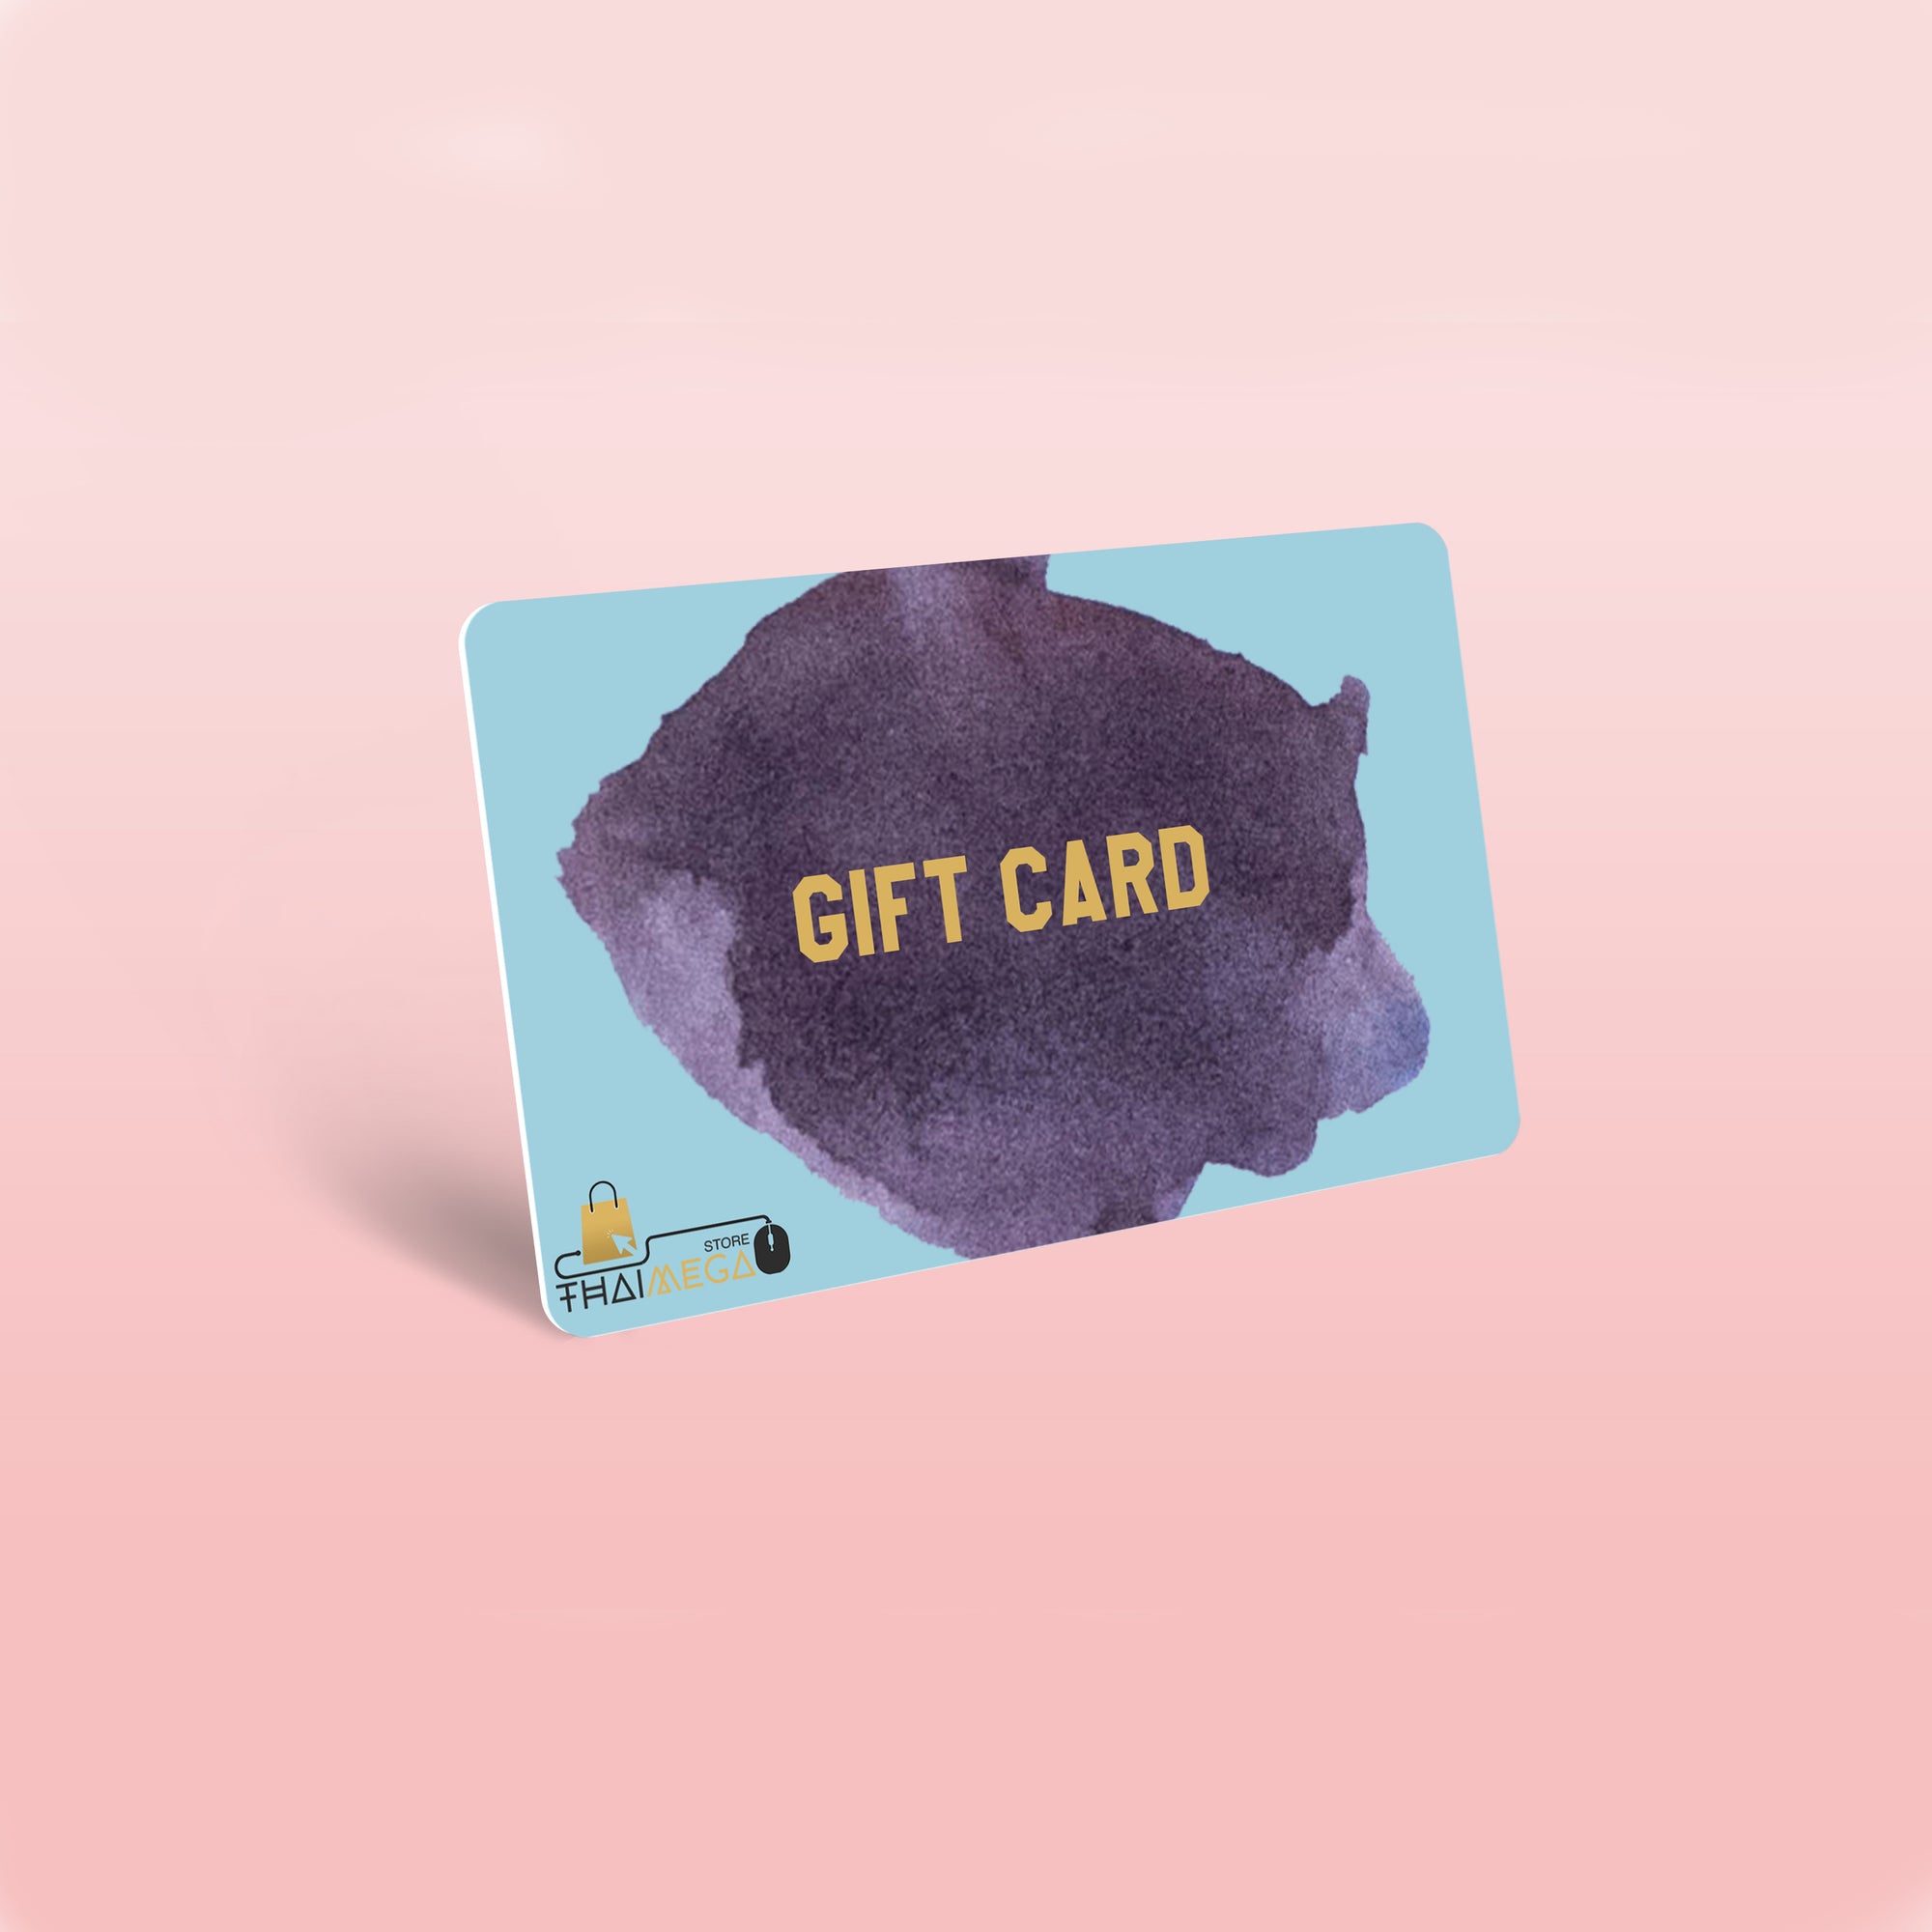 Gift Cards For your special ones